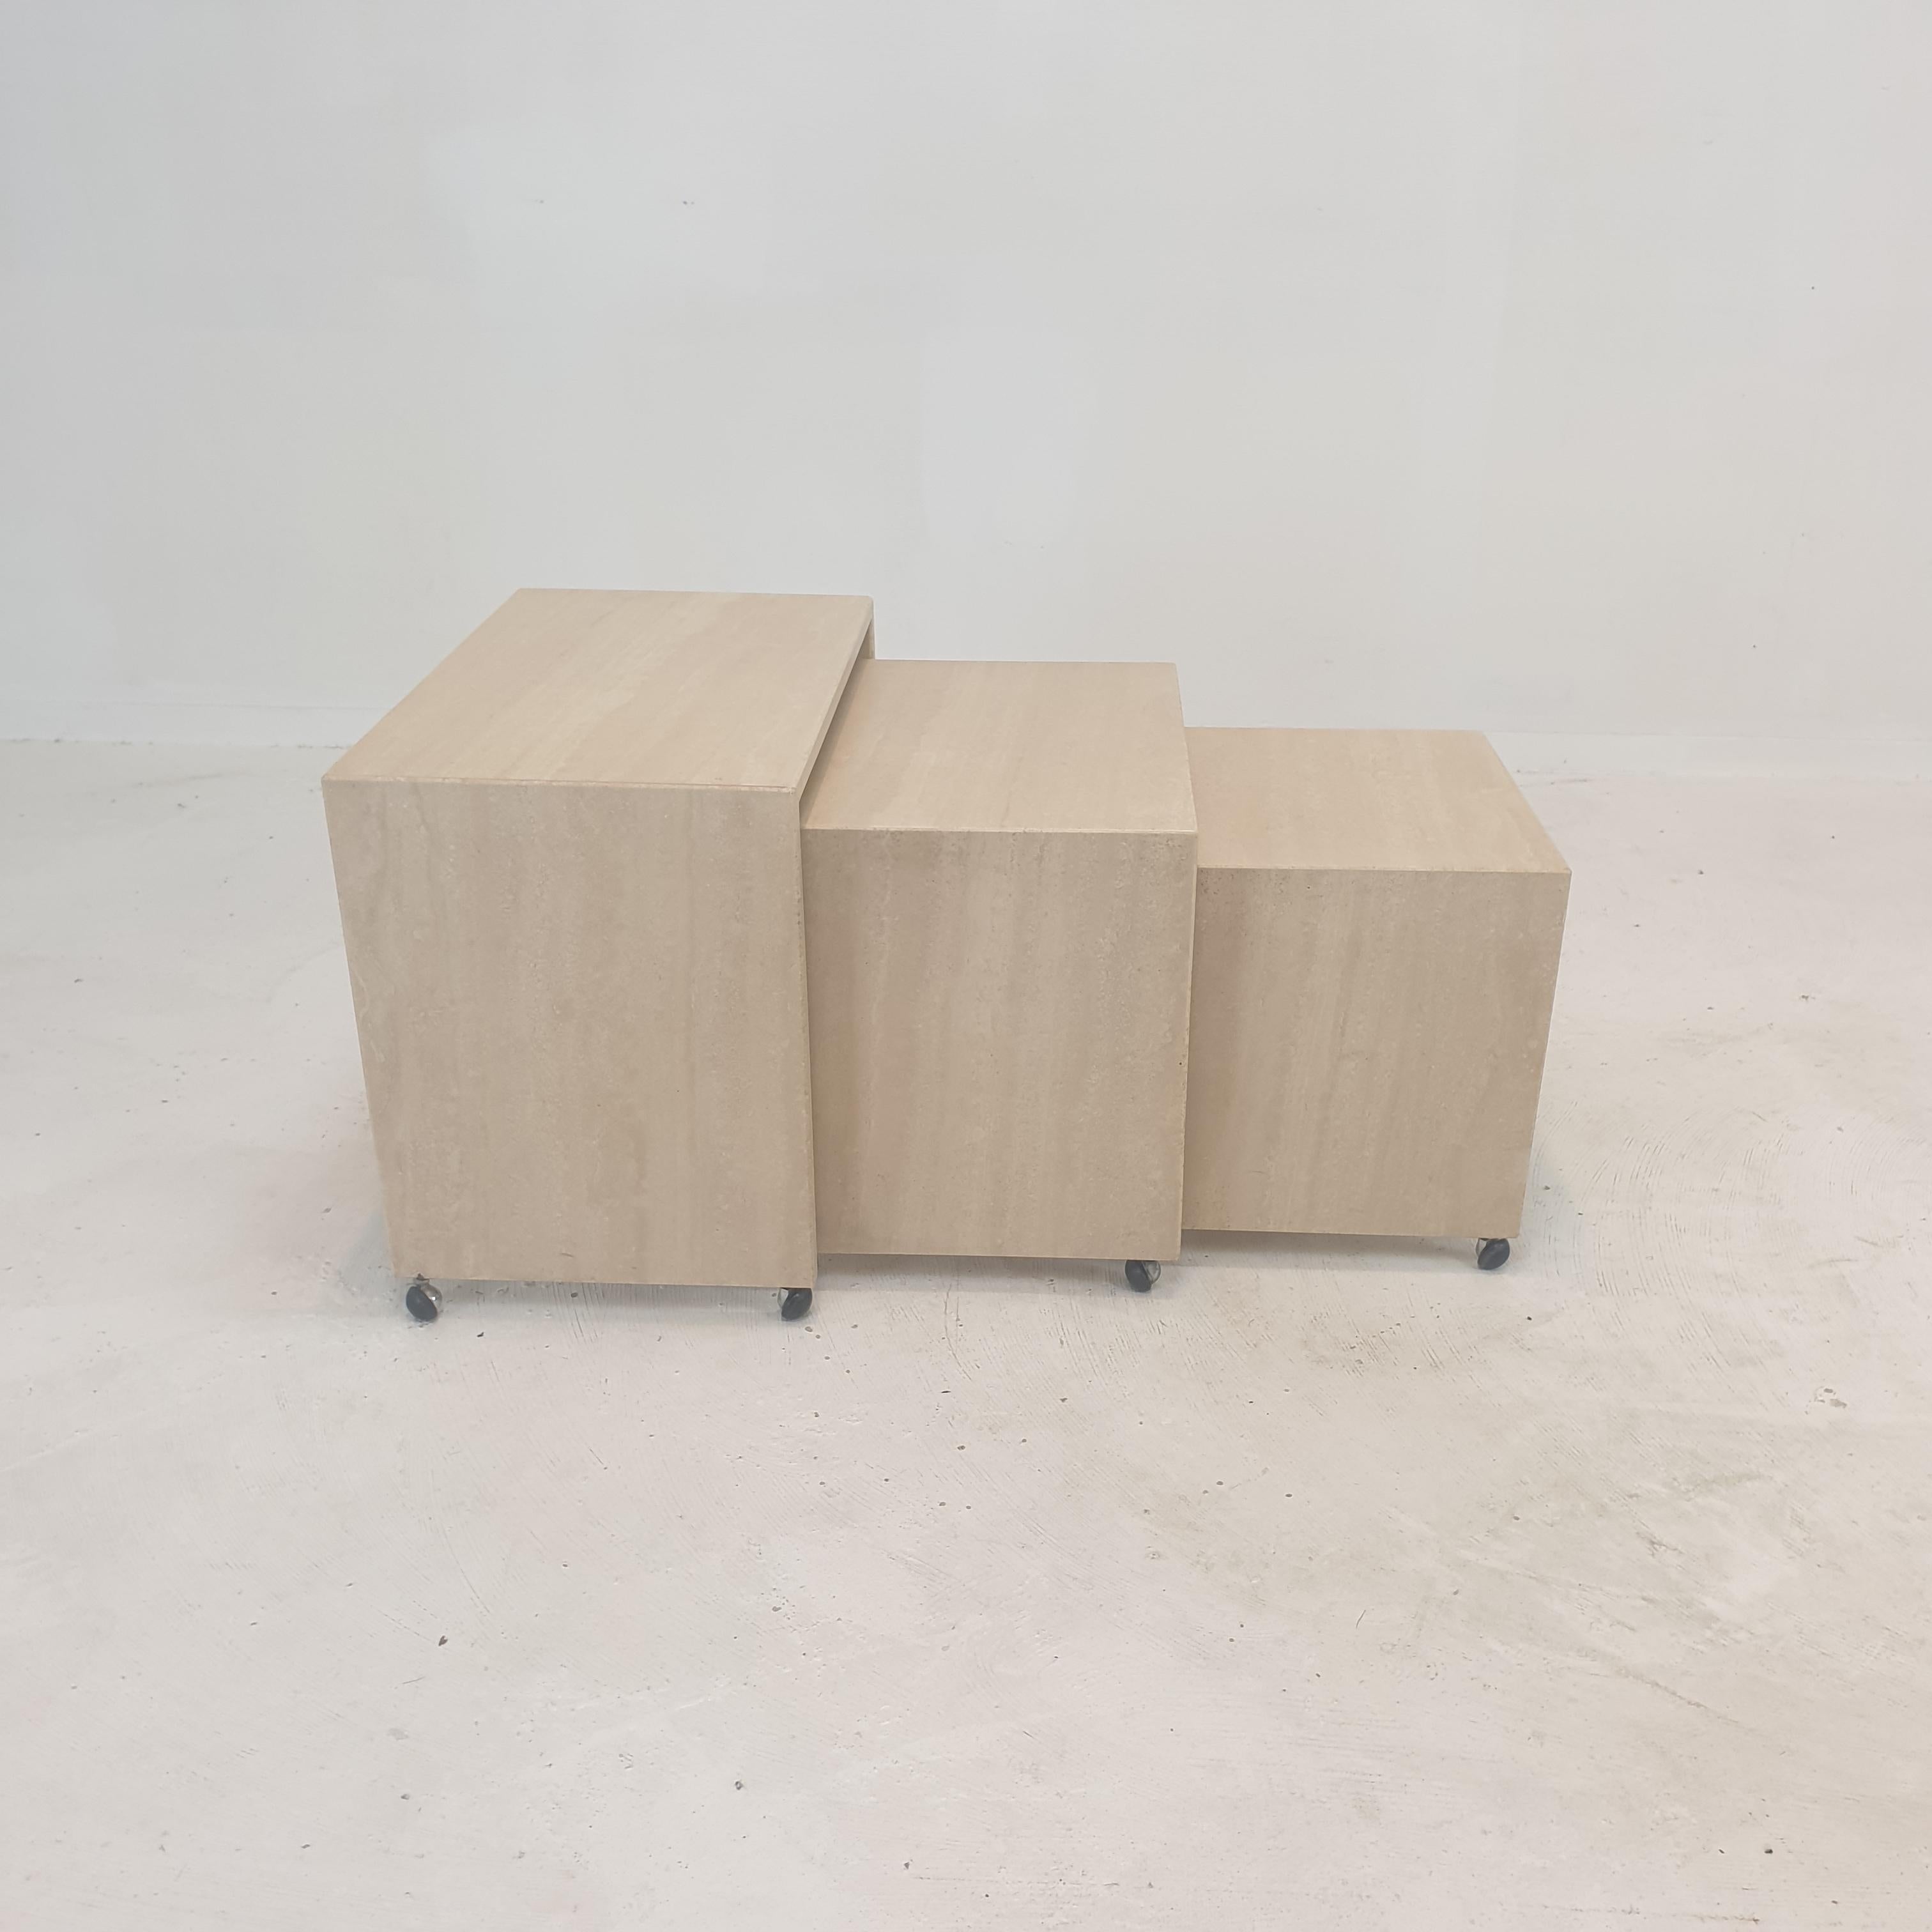 Very nice set of 3 Italian Coffee or Nesting Tables, 1980s.

The tables have all a different Size so they fit in each other.

The set is handcrafted out of beautiful travertine.

Every table has 4 wheels, so they are easy to move.

We work